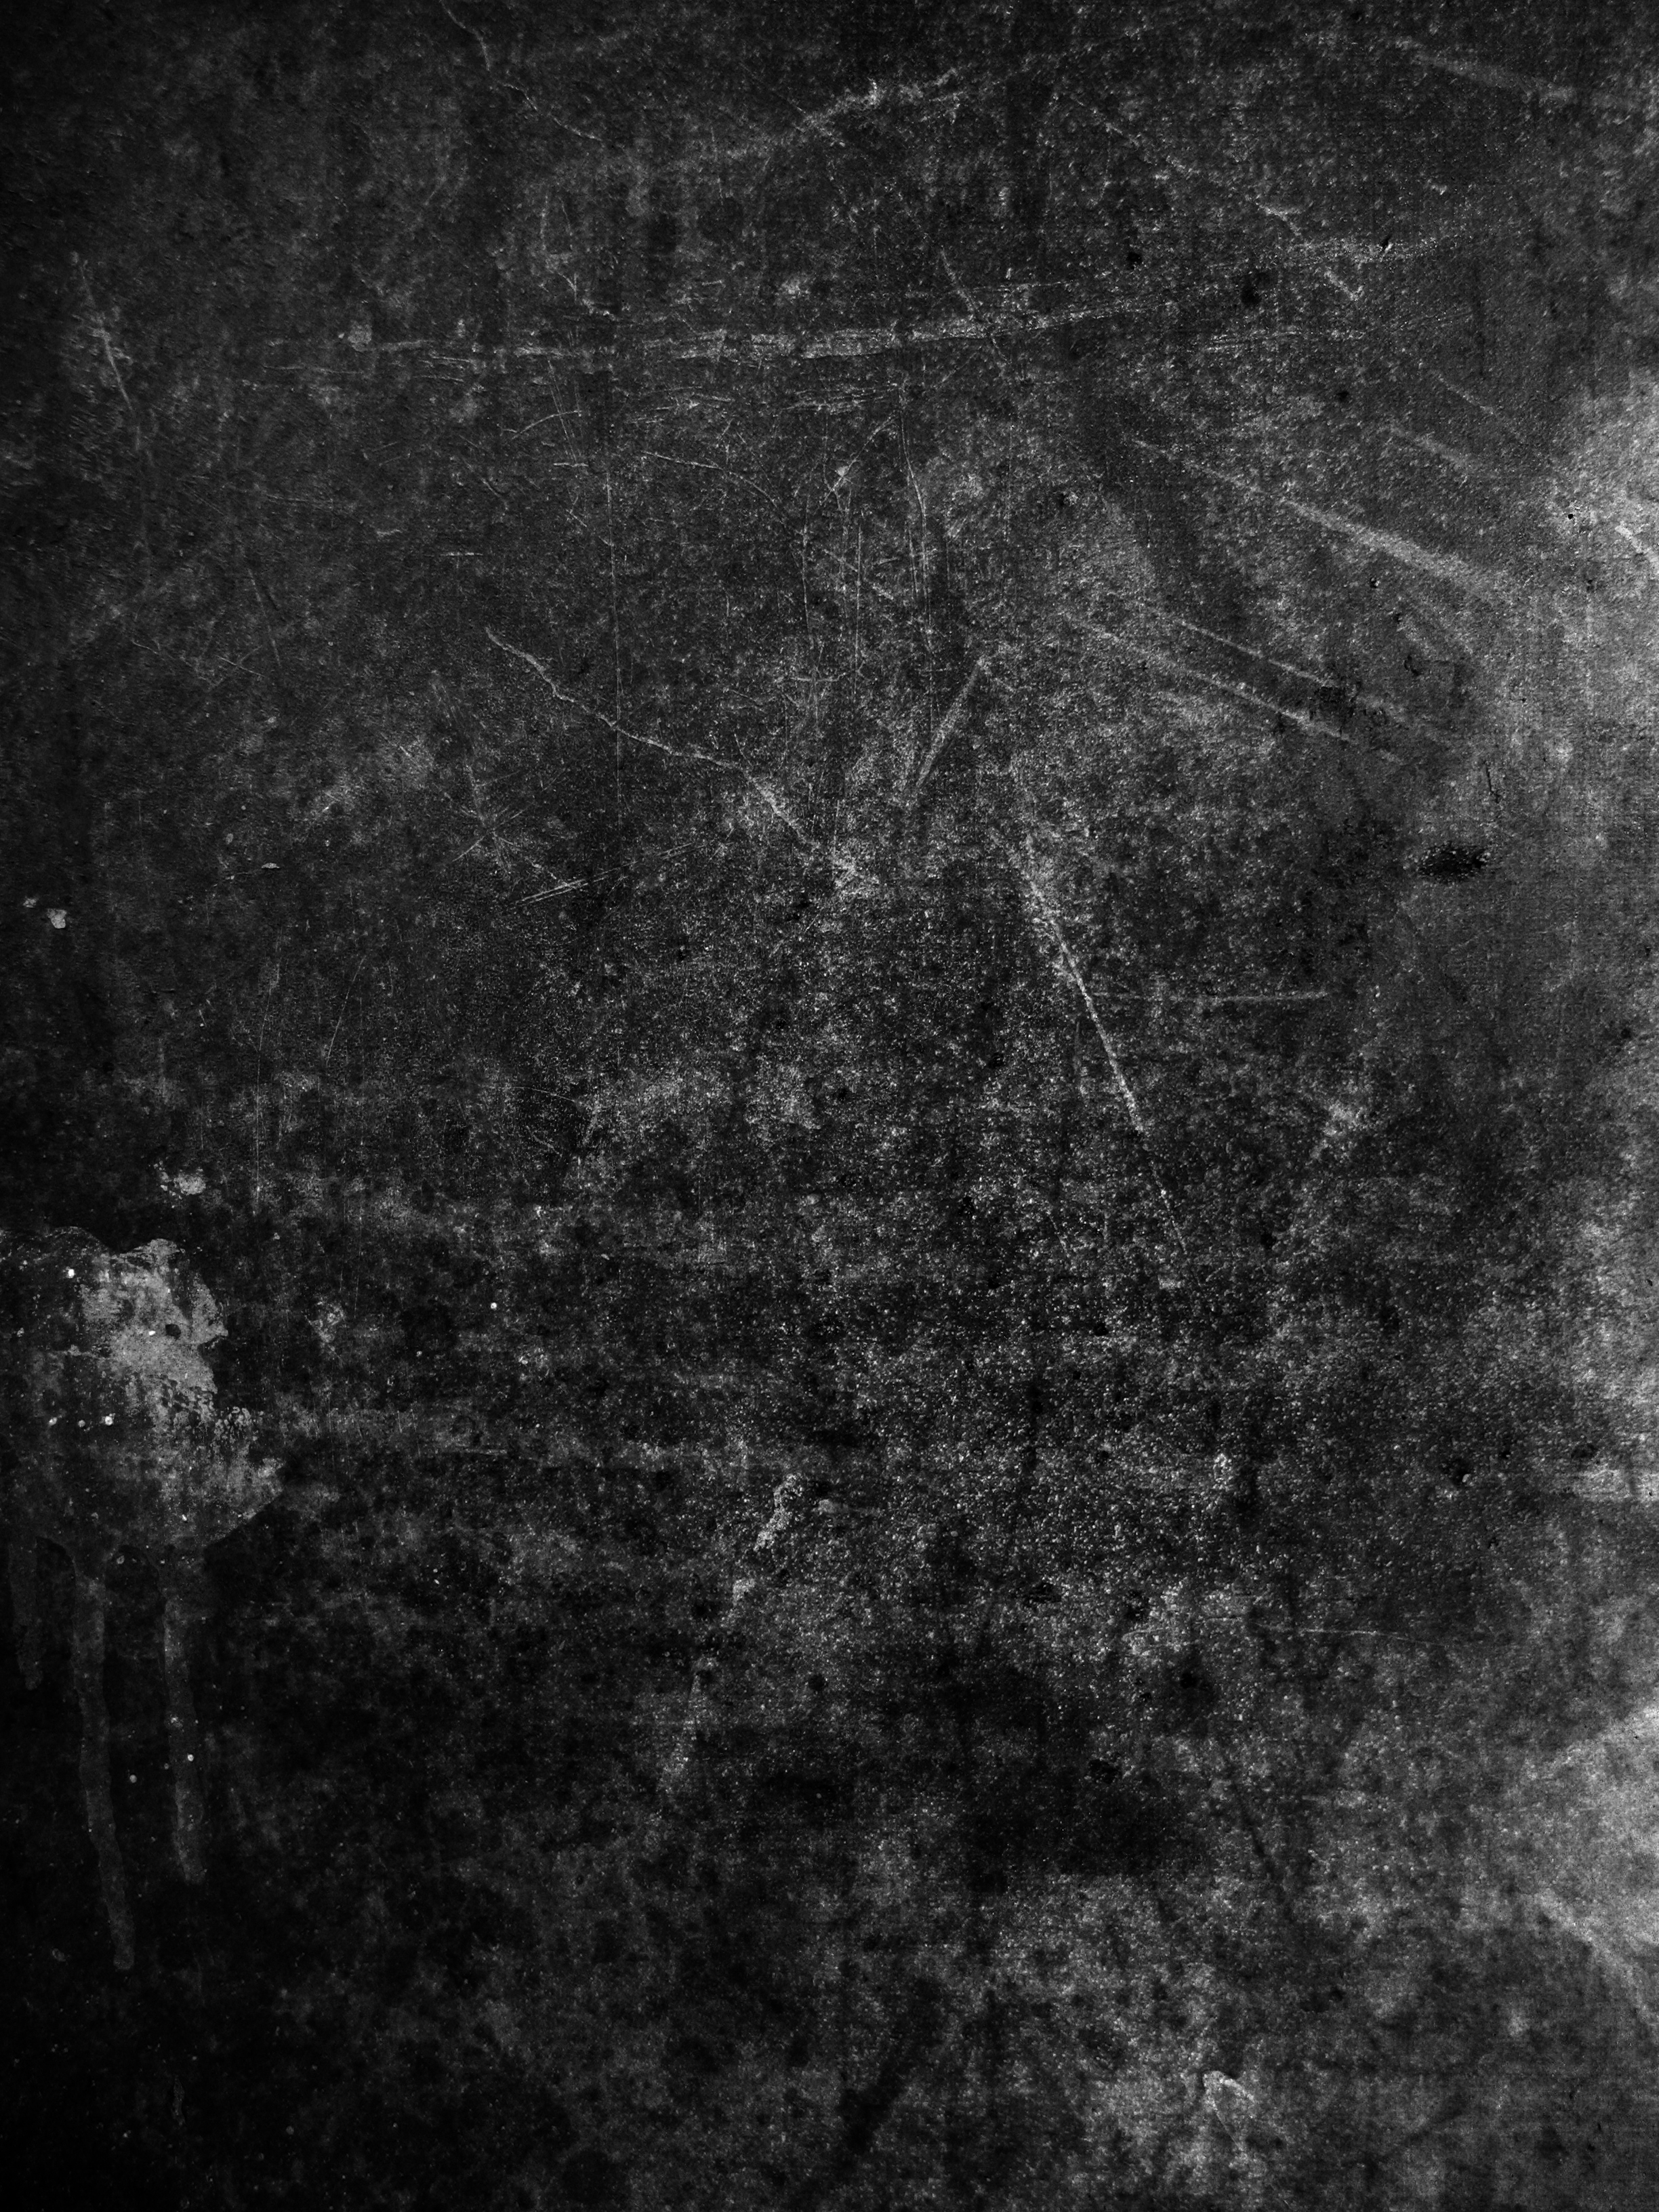 Black and white grunge texture - Photoshop Textures | BrushLovers.com